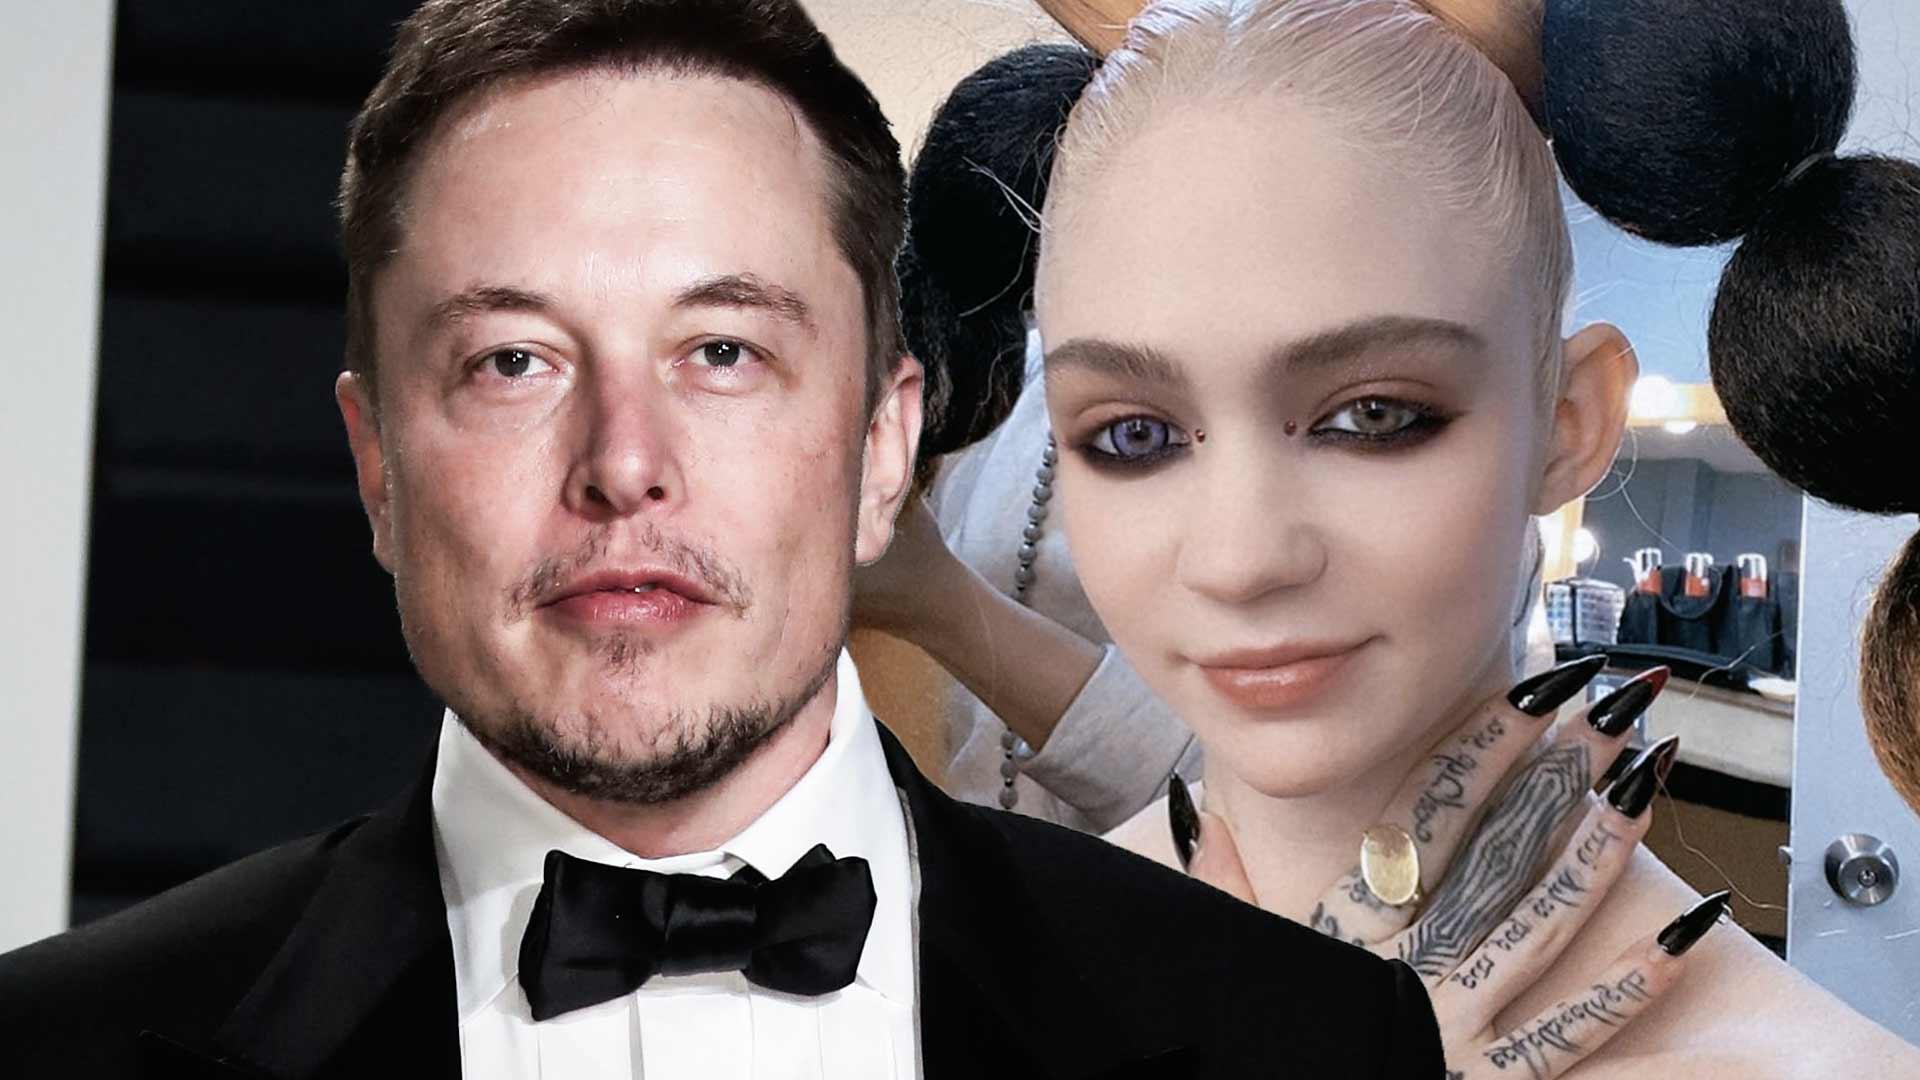 Rumors Swirl That Elon Musk & Grimes Are Naming Their Baby ‘Influenza’